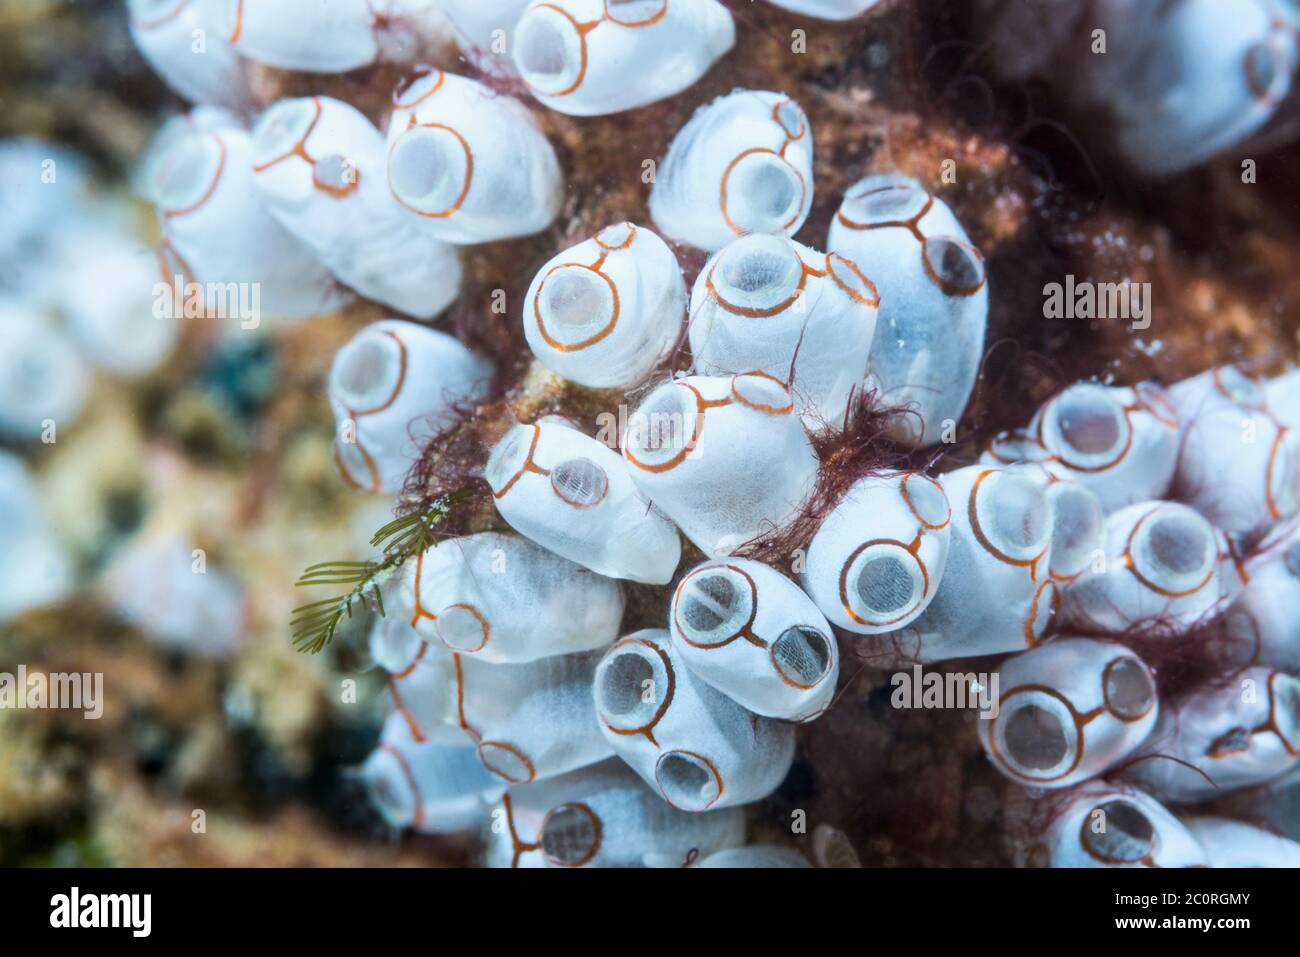 Ascidian or Sea squirt - Clavellina sp.  West Papua, Indonesia.  Indo-West Pacific. Stock Photo